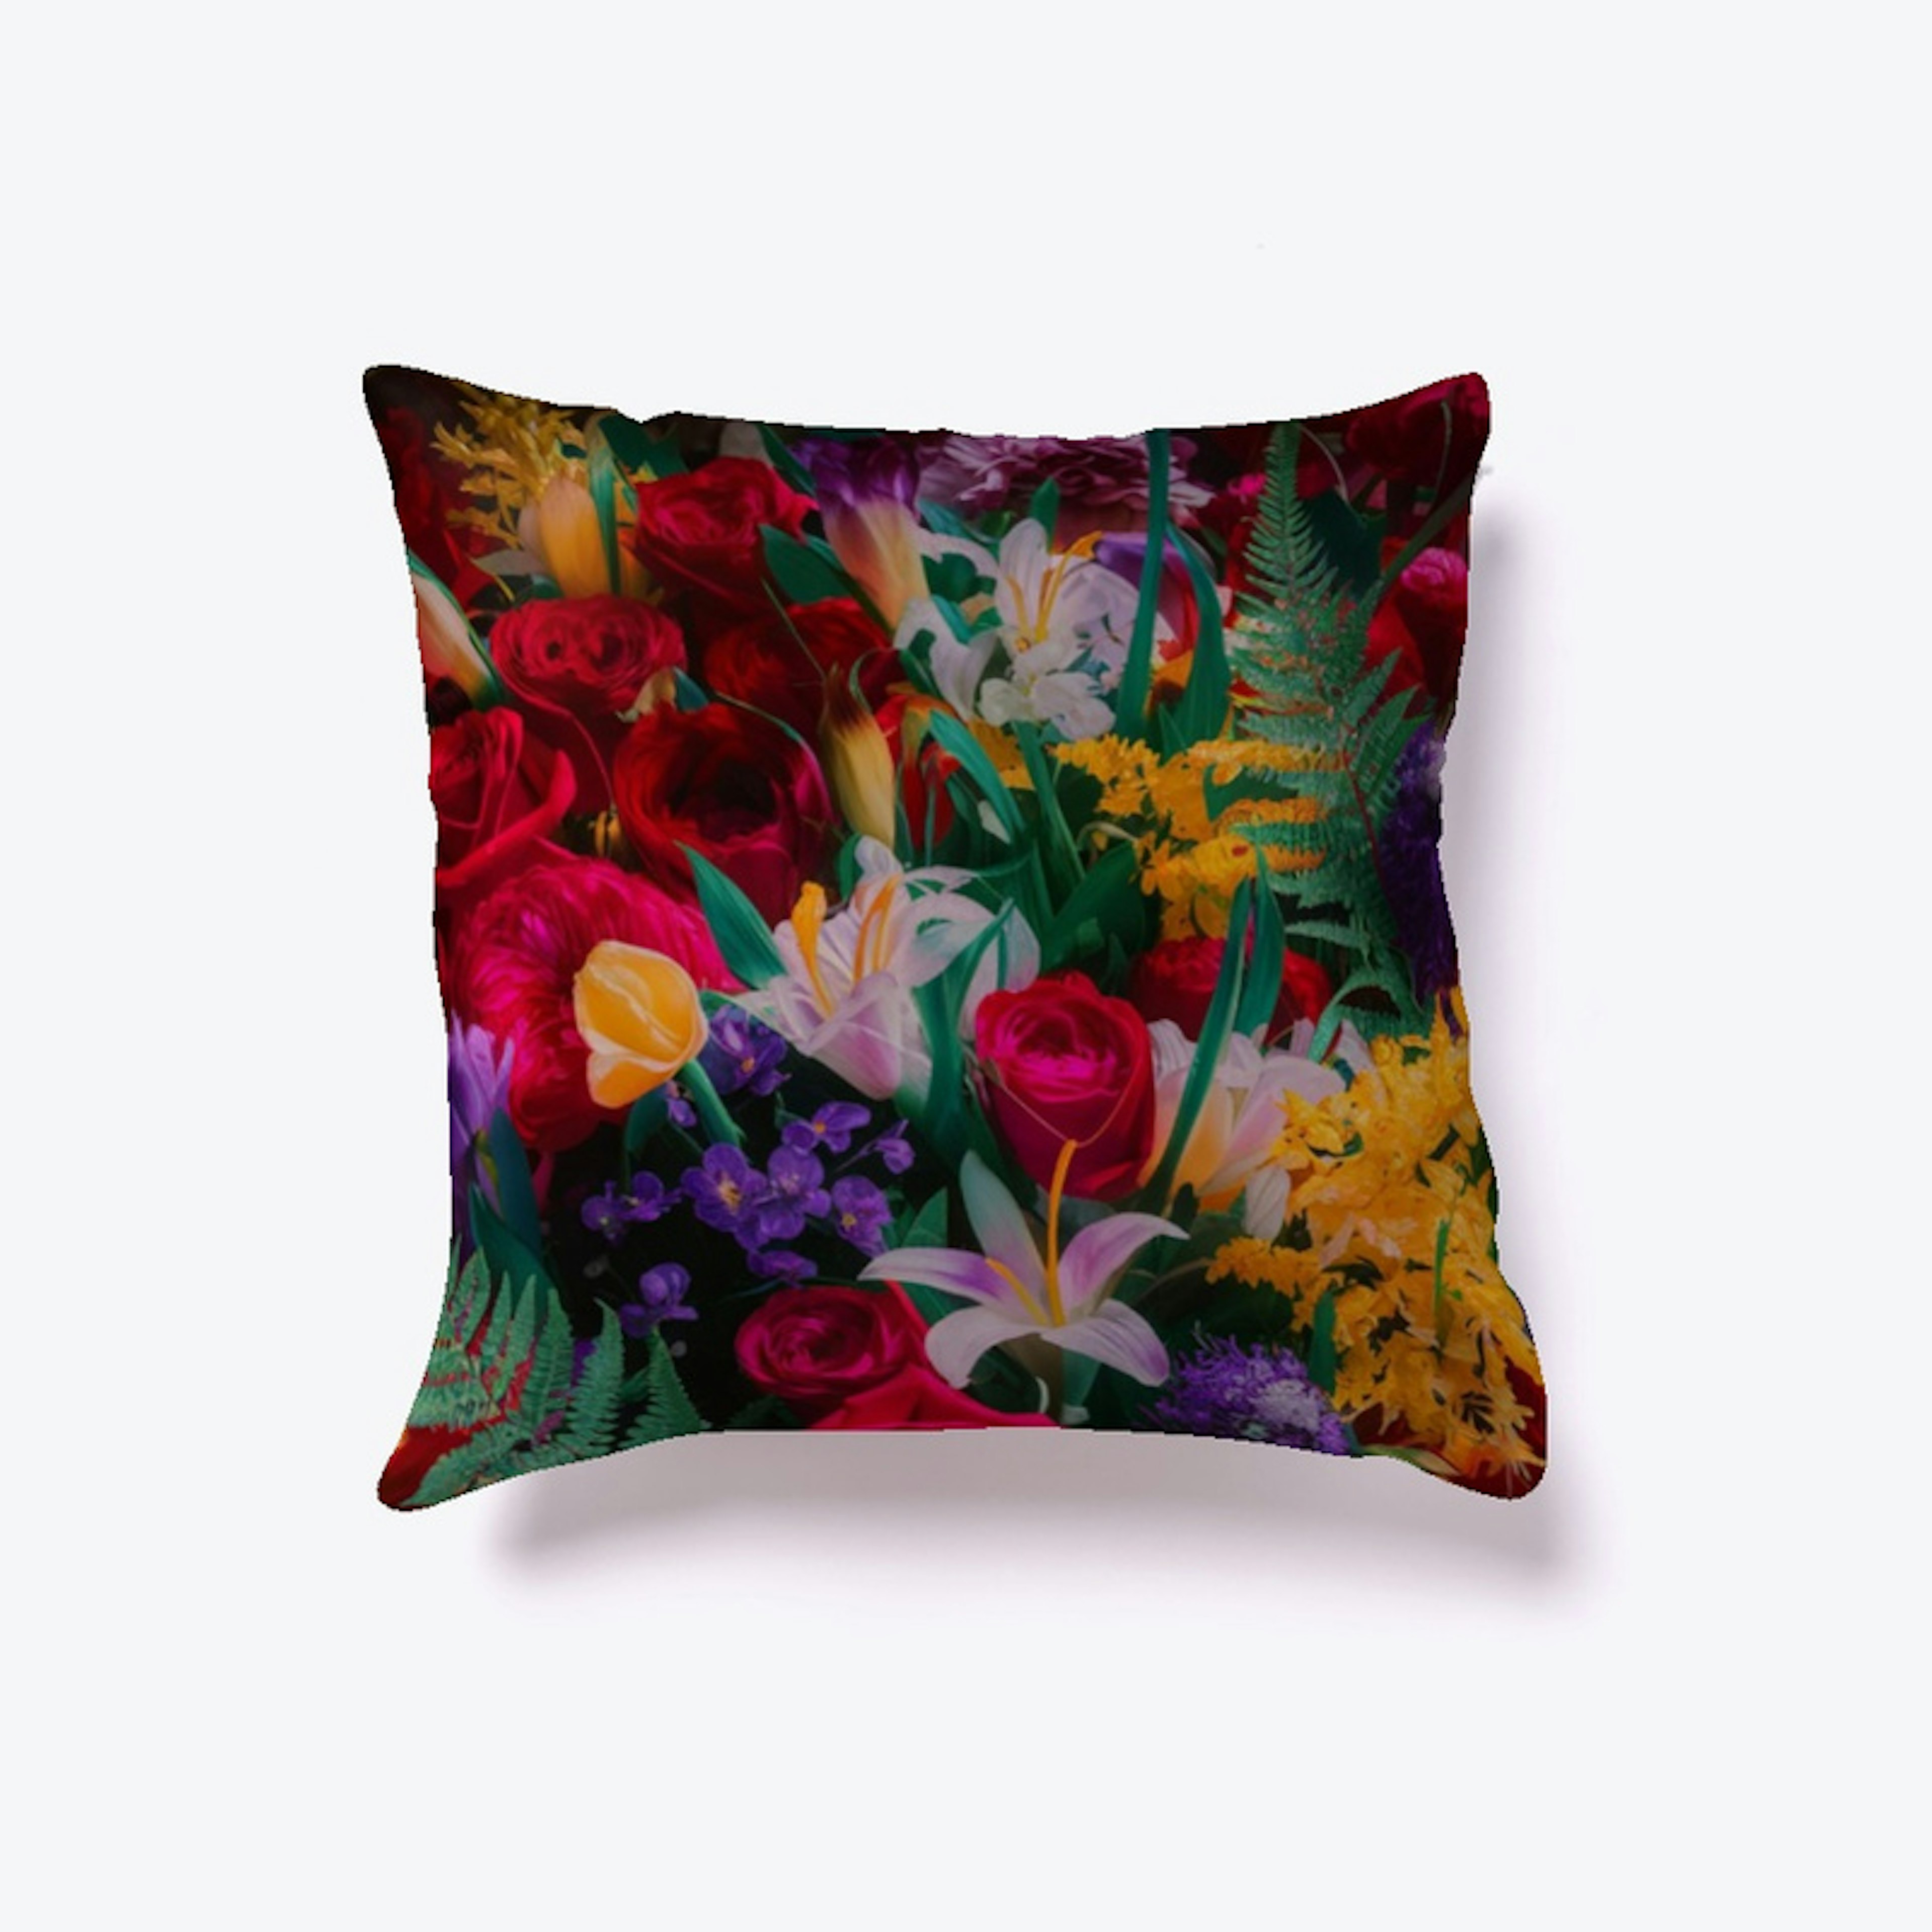 OES 5 FLOWERS PILLOW